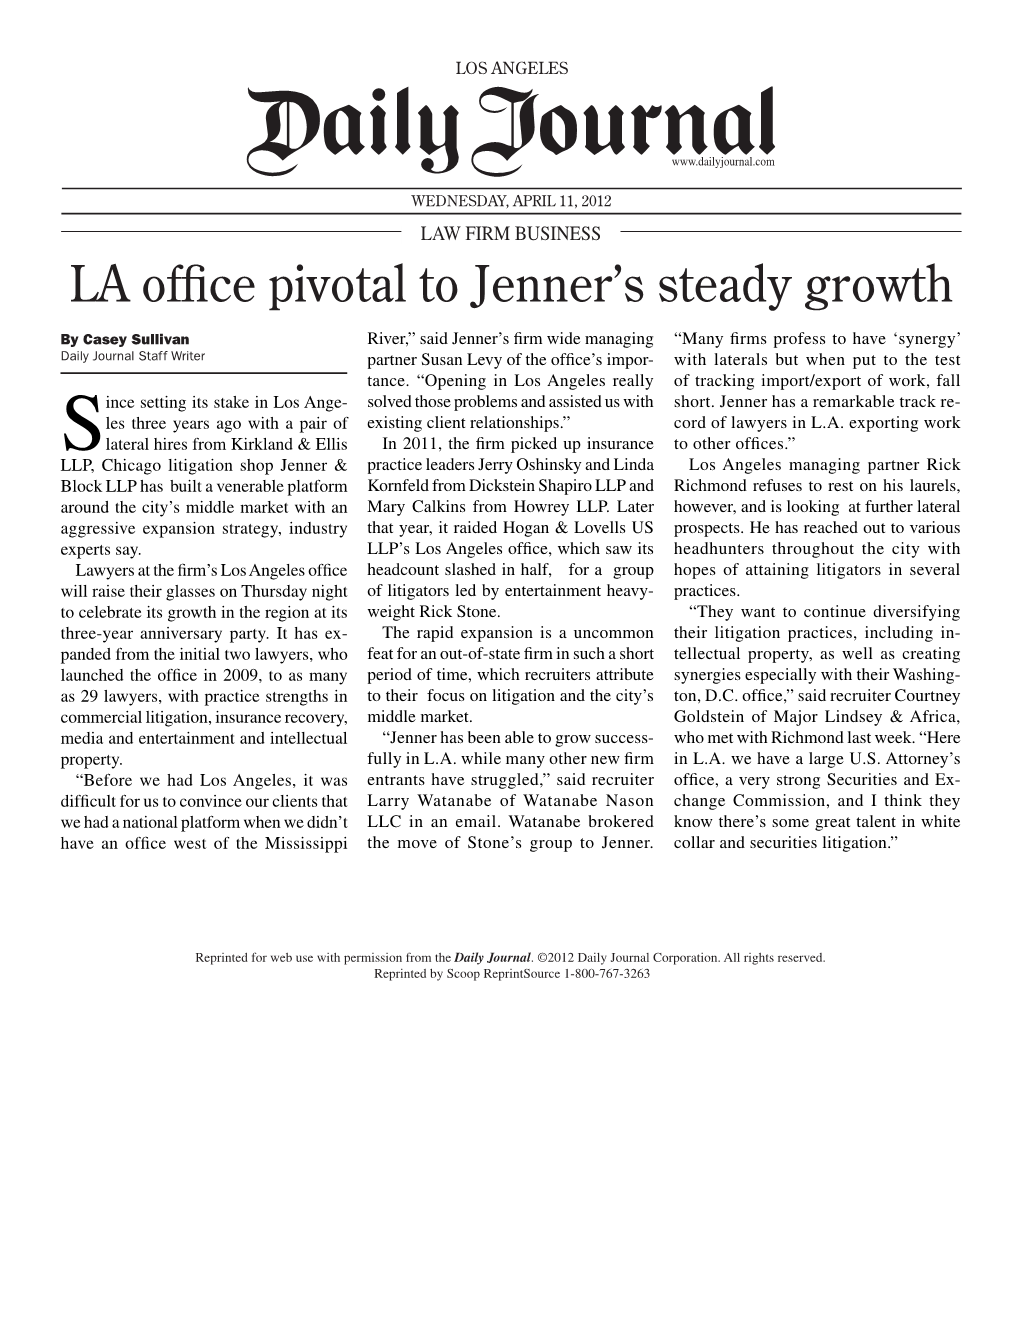 LA Office Pivotal to Jenner's Steady Growth